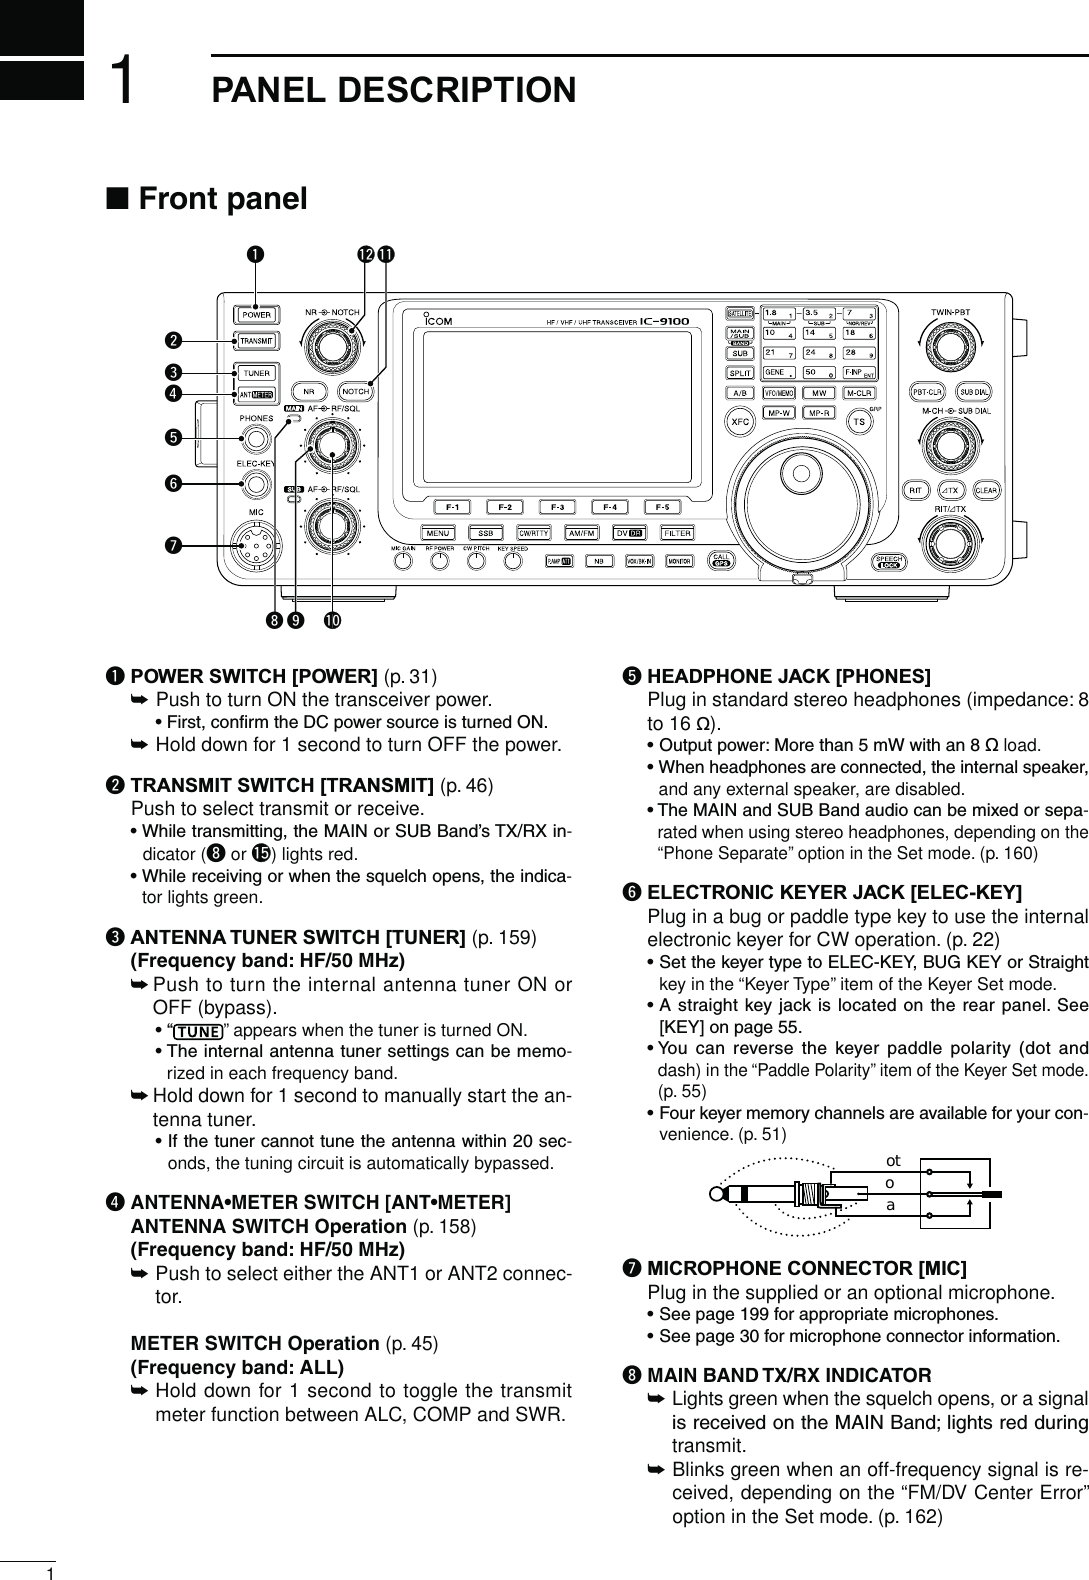 11PANEL DESCRIPTIONqPOWER SWITCH [POWER] (p. 31)±Push to turn ON the transceiver power.  s&amp;IRSTCONlRMTHE$#POWERSOURCEISTURNED/.±Hold down for 1 second to turn OFF the power.wTRANSMIT SWITCH [TRANSMIT] (p. 46)Push to select transmit or receive.s7HILETRANSMITTINGTHE-!).OR35&quot;&quot;ANDS4828IN-dicator (i or !5) lights red.s7HILERECEIVINGORWHENTHESQUELCHOPENSTHEINDICA-tor lights green.eANTENNA TUNER SWITCH [TUNER] (p. 159) &amp;REQUENCYBAND(&amp;-(Z±  Push to turn the internal antenna tuner ON or OFF (bypass).sh ” appears when the tuner is turned ON.s4HEINTERNALANTENNATUNERSETTINGSCANBEMEMO-rized in each frequency band.±Hold down for 1 second to manually start the an-tenna tuner.s)FTHETUNERCANNOTTUNETHEANTENNAWITHINSEC-onds, the tuning circuit is automatically bypassed.r  !.4%..!s-%4%237)4#(;!.4s-%4%2= !.4%..!37)4#(/PERATION(p. 158) &amp;REQUENCYBAND(&amp;-(Z±  Push to select either the ANT1 or ANT2 connec-tor. -%4%237)4#(/PERATION(p. 45) &amp;REQUENCYBAND!,,±  Hold down for 1 second to toggle the transmit meter function between ALC, COMP and SWR.tHEADPHONE JACK [PHONES]  Plug in standard stereo headphones (impedance: 8 to 16 ø). s/UTPUTPOWER-ORETHANM7WITHANø load.s7HENHEADPHONESARECONNECTEDTHEINTERNALSPEAKERand any external speaker, are disabled.s4HE-!).AND35&quot;&quot;ANDAUDIOCANBEMIXEDORSEPA-rated when using stereo headphones, depending on the “Phone Separate” option in the Set mode. (p. 160)yELECTRONIC KEYER JACK [ELEC-KEY]  Plug in a bug or paddle type key to use the internal electronic keyer for CW operation. (p. 22)s3ETTHEKEYERTYPETO%,%#+%9&quot;5&apos;+%9OR3TRAIGHTkey in the “Keyer Type” item of the Keyer Set mode.s!STRAIGHTKEYJACKISLOCATEDONTHEREARPANEL3EE;+%9=ONPAGEs9OU CAN REVERSE THE KEYER PADDLE POLARITY DOT ANDdash) in the “Paddle Polarity” item ofthe Keyer Set mode.(p. 55)s&amp;OURKEYERMEMORYCHANNELSAREAVAILABLEFORYOURCON-venience. (p. 51)otoauMICROPHONE CONNECTOR [MIC]Plug in the supplied or an optional microphone. s3EEPAGEFORAPPROPRIATEMICROPHONES s3EEPAGEFORMICROPHONECONNECTORINFORMATIONi-!).&quot;!.$4828).$)#!4/2±  Lights green when the squelch opens, or a signal ISRECEIVEDONTHE-!).&quot;ANDLIGHTSREDDURINGtransmit.±   Blinks green when an off-frequency signal is re-ceived, depending on the “FM/DV Center Error” option in the Set mode. (p. 162)N&amp;RONTPANELti !0yqeruo!2!1w